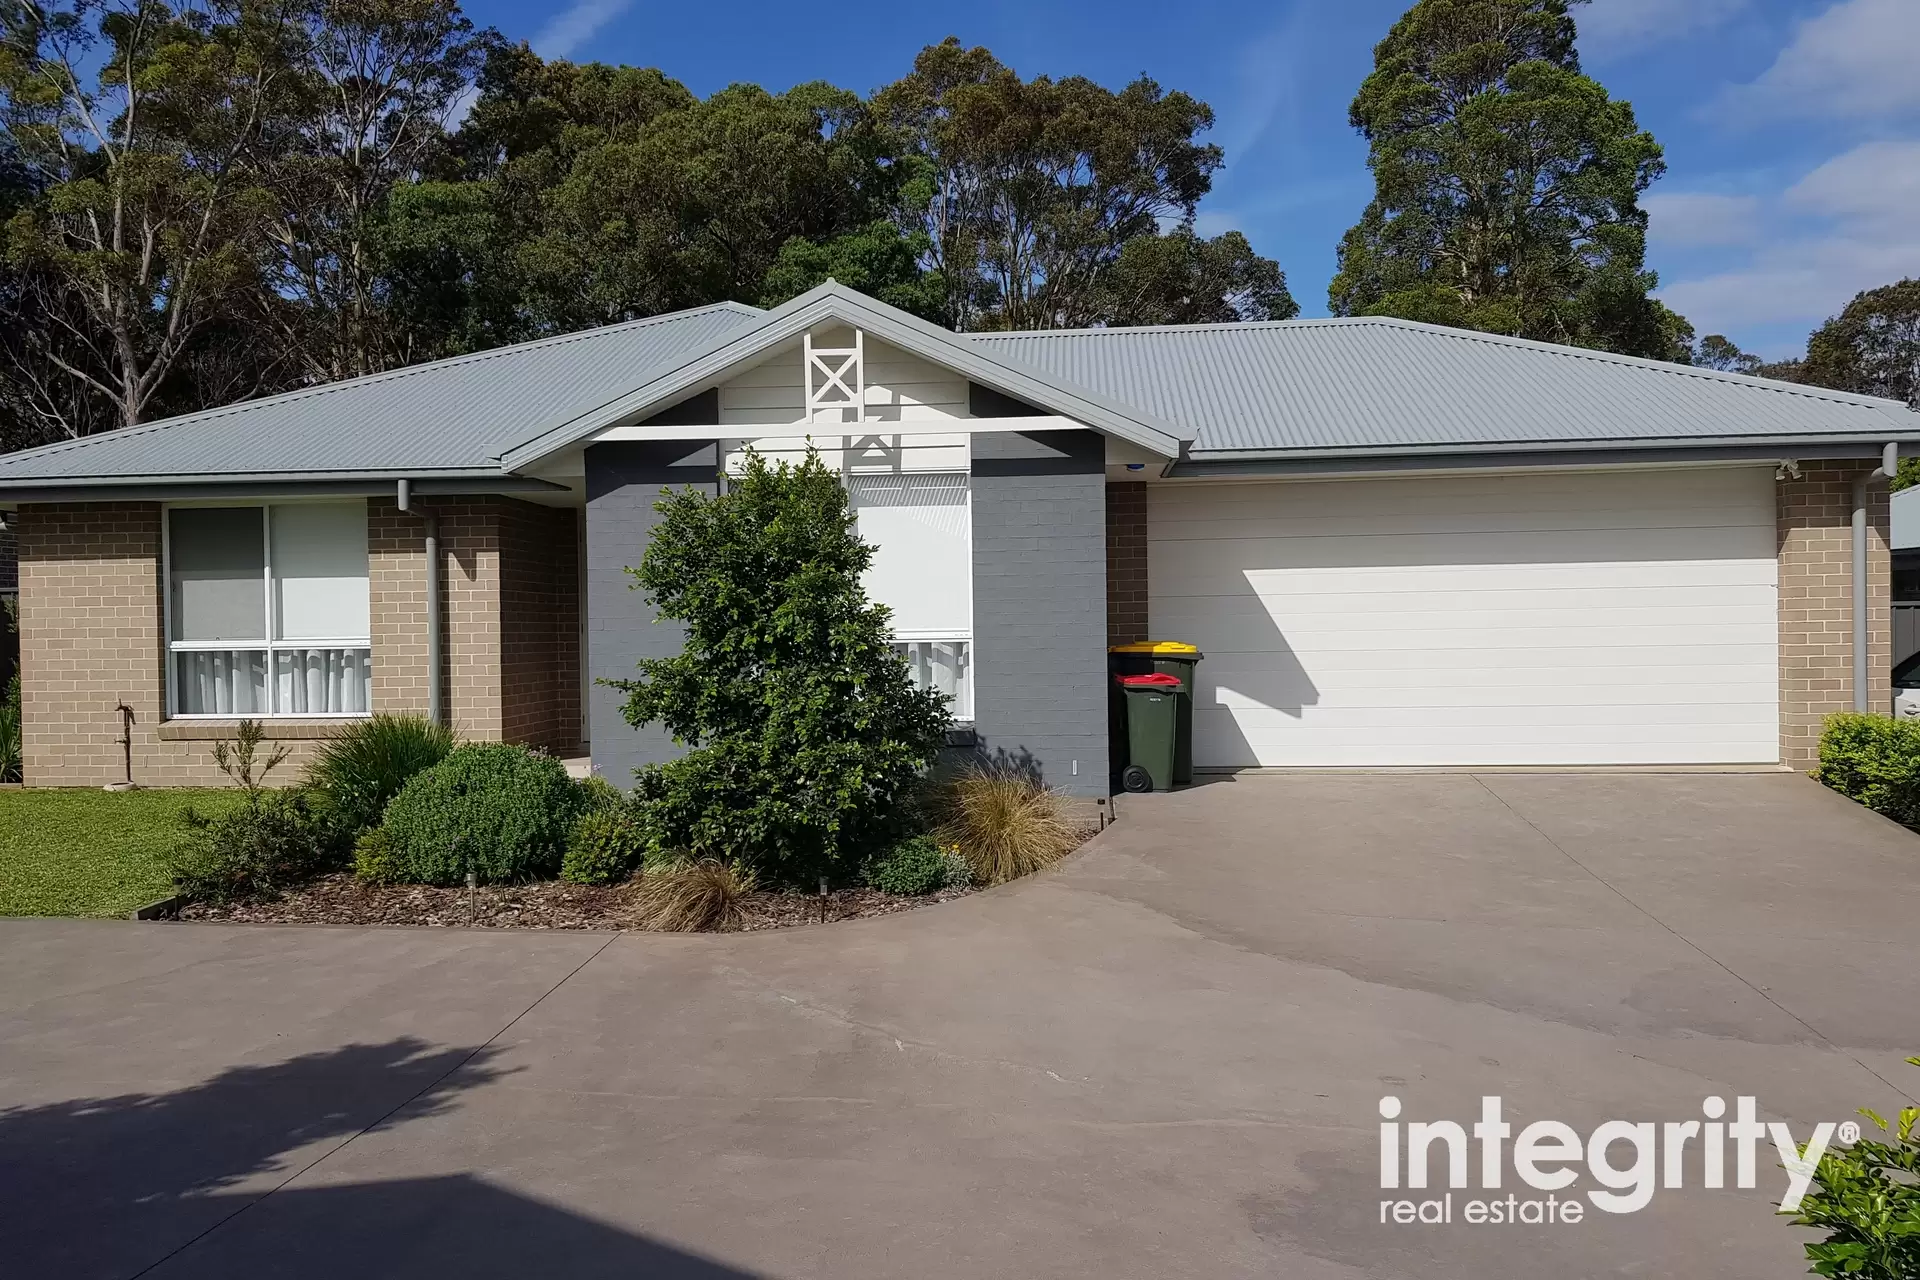 4/57 Hillcrest Avenue, South Nowra For Lease by Integrity Real Estate